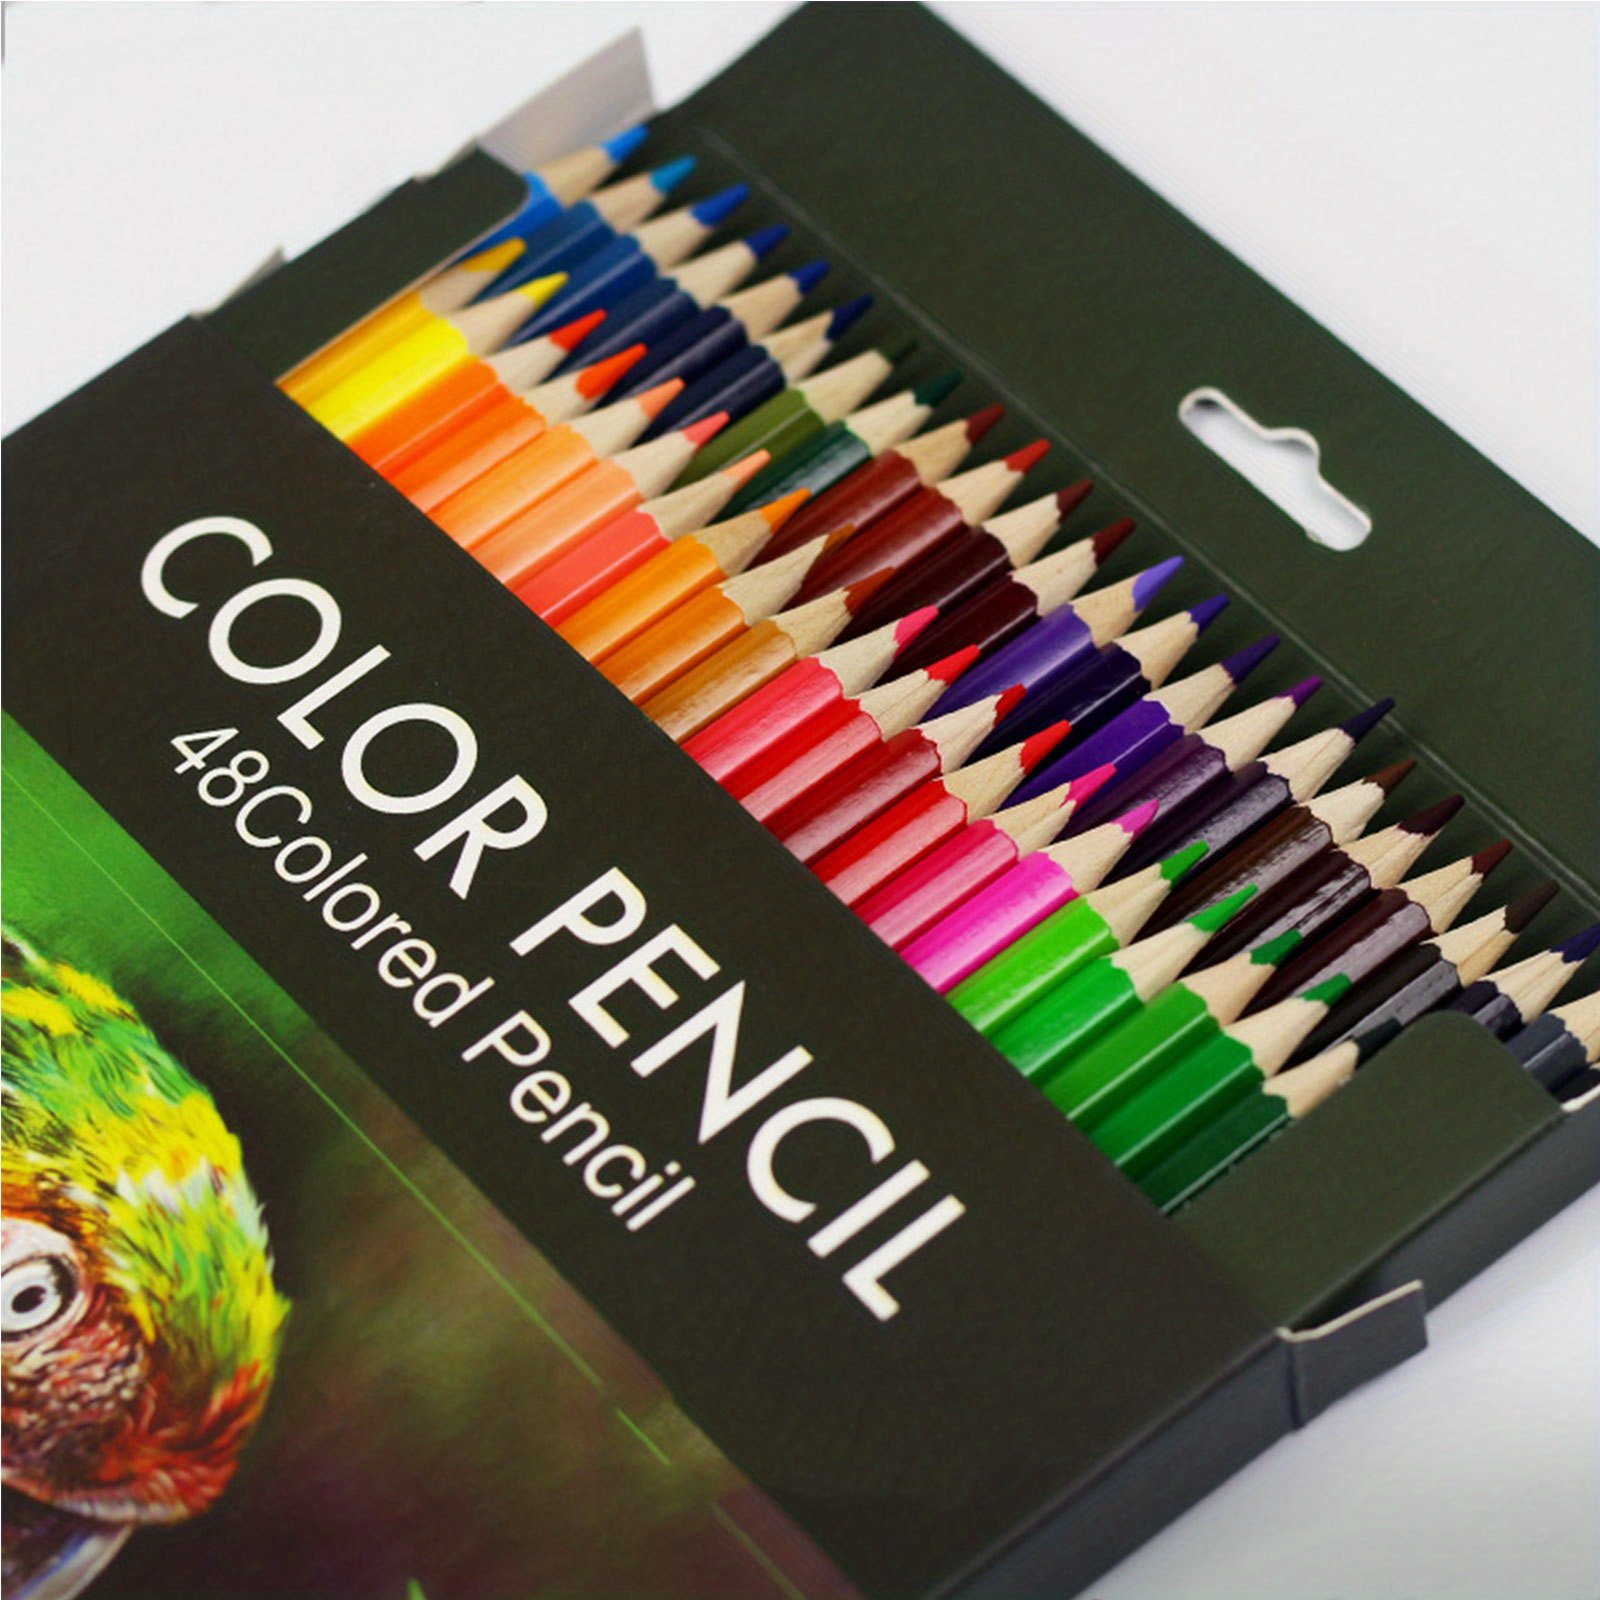 48-color Colored Pencils Set For Adults And Kids, Drawing Pencils For  Sketch, Arts, Adult Coloring Books